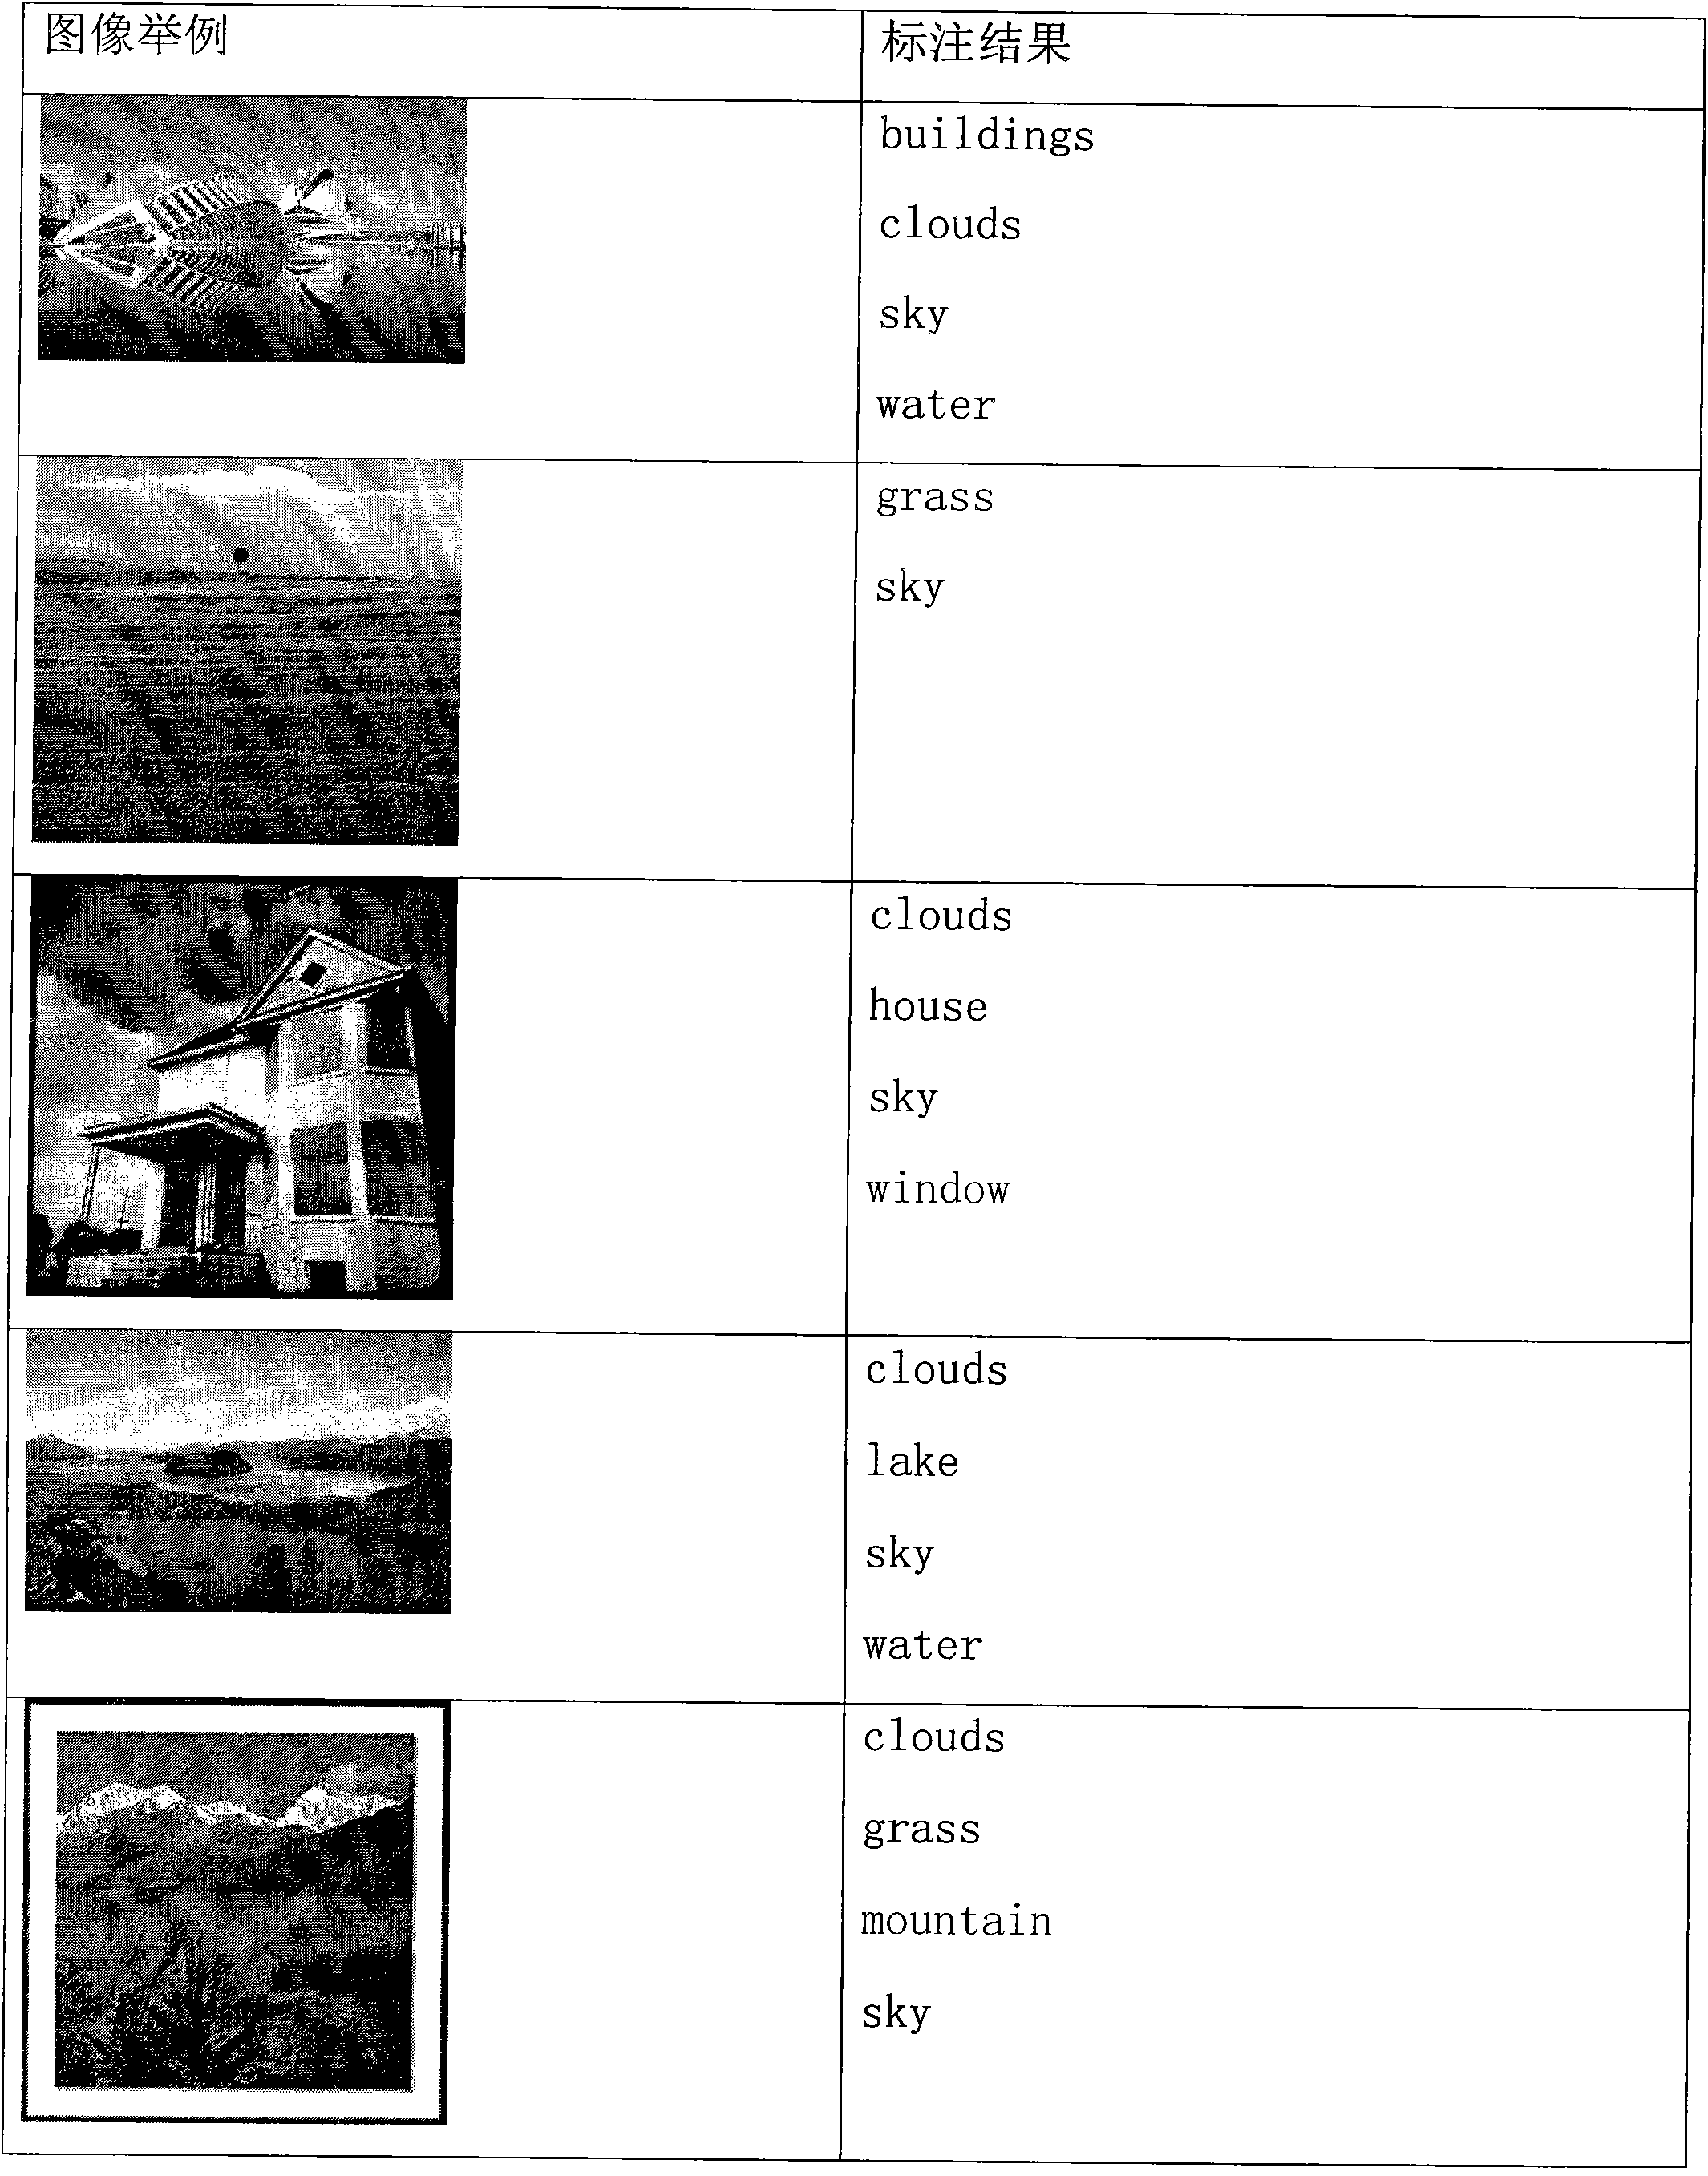 Image annotation method based on sparse group structure